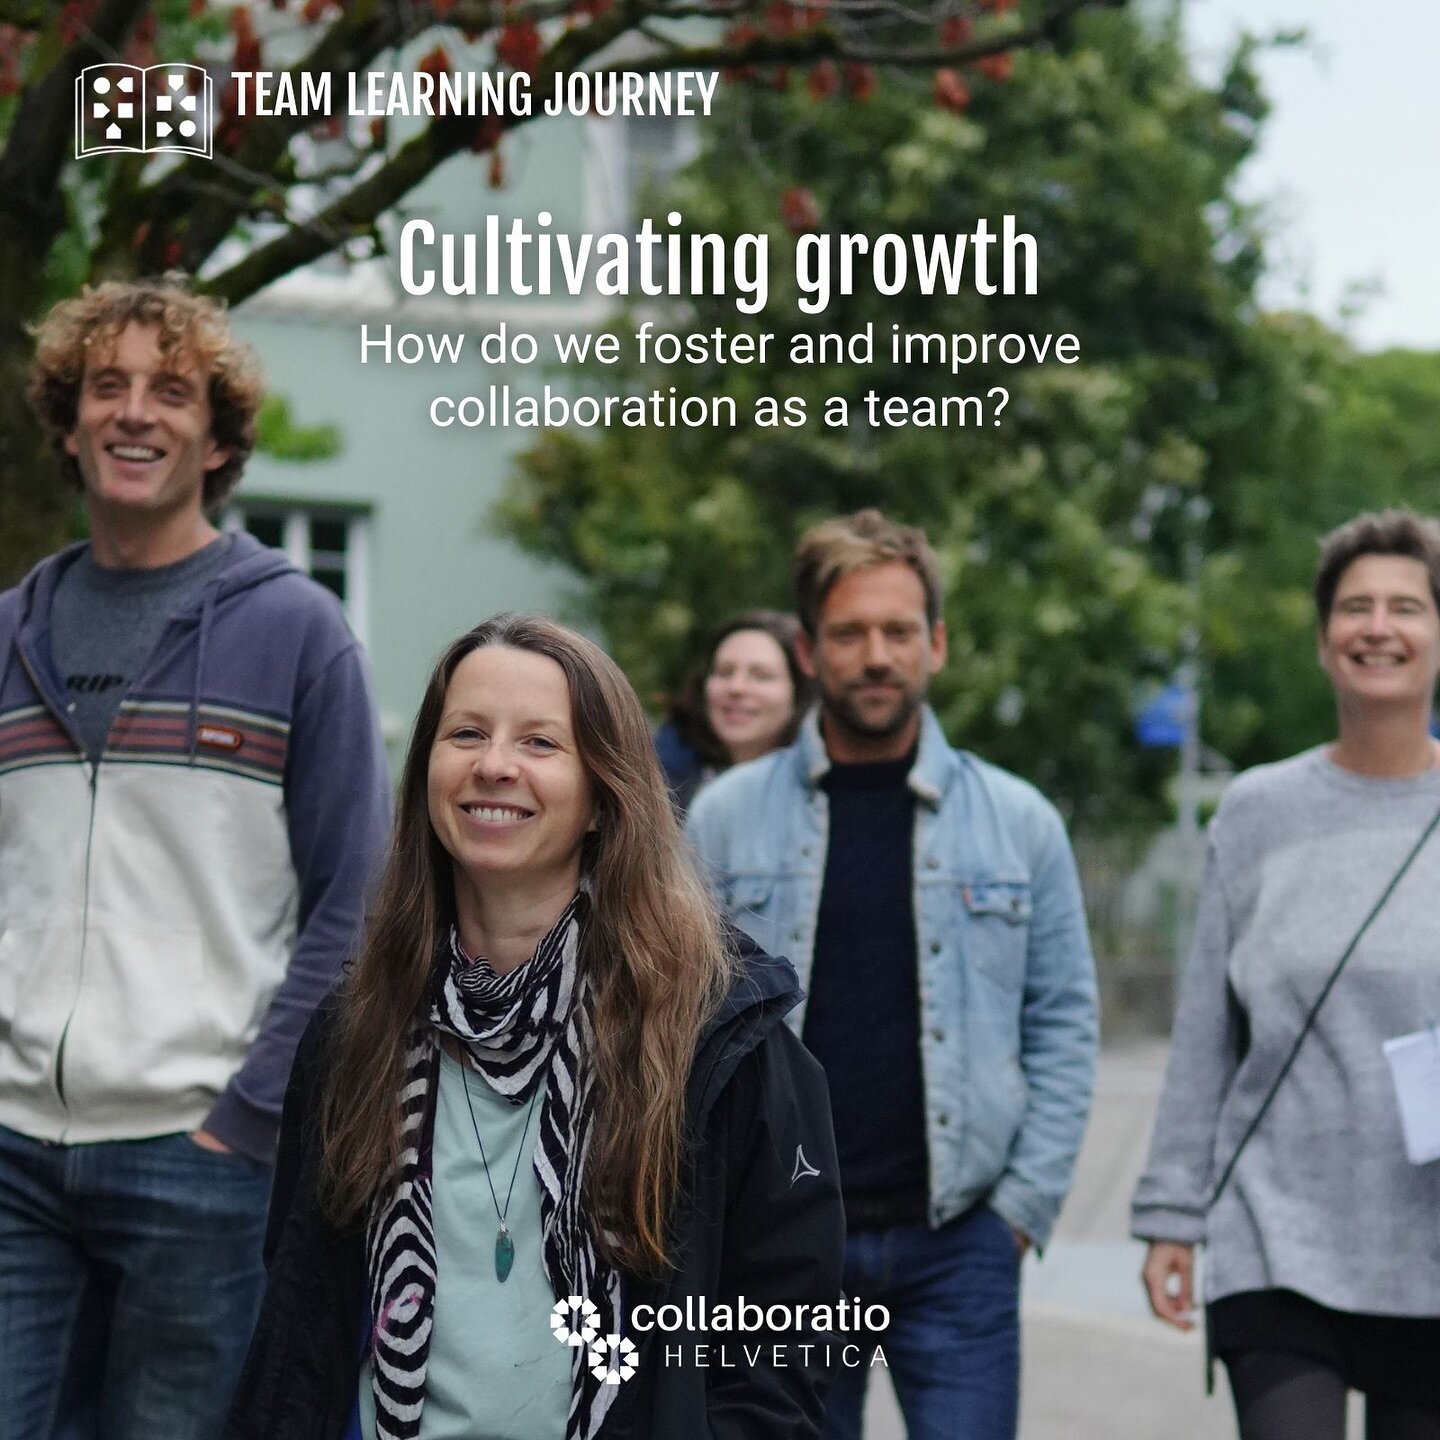 Today is World Education Day! On this occasion, we are happy to start with a series of posts to share insights from our learning journey as a team! 💡

🤩 As you know, we never stand still at collaboratio helvetica. Personal growth and mutual empower